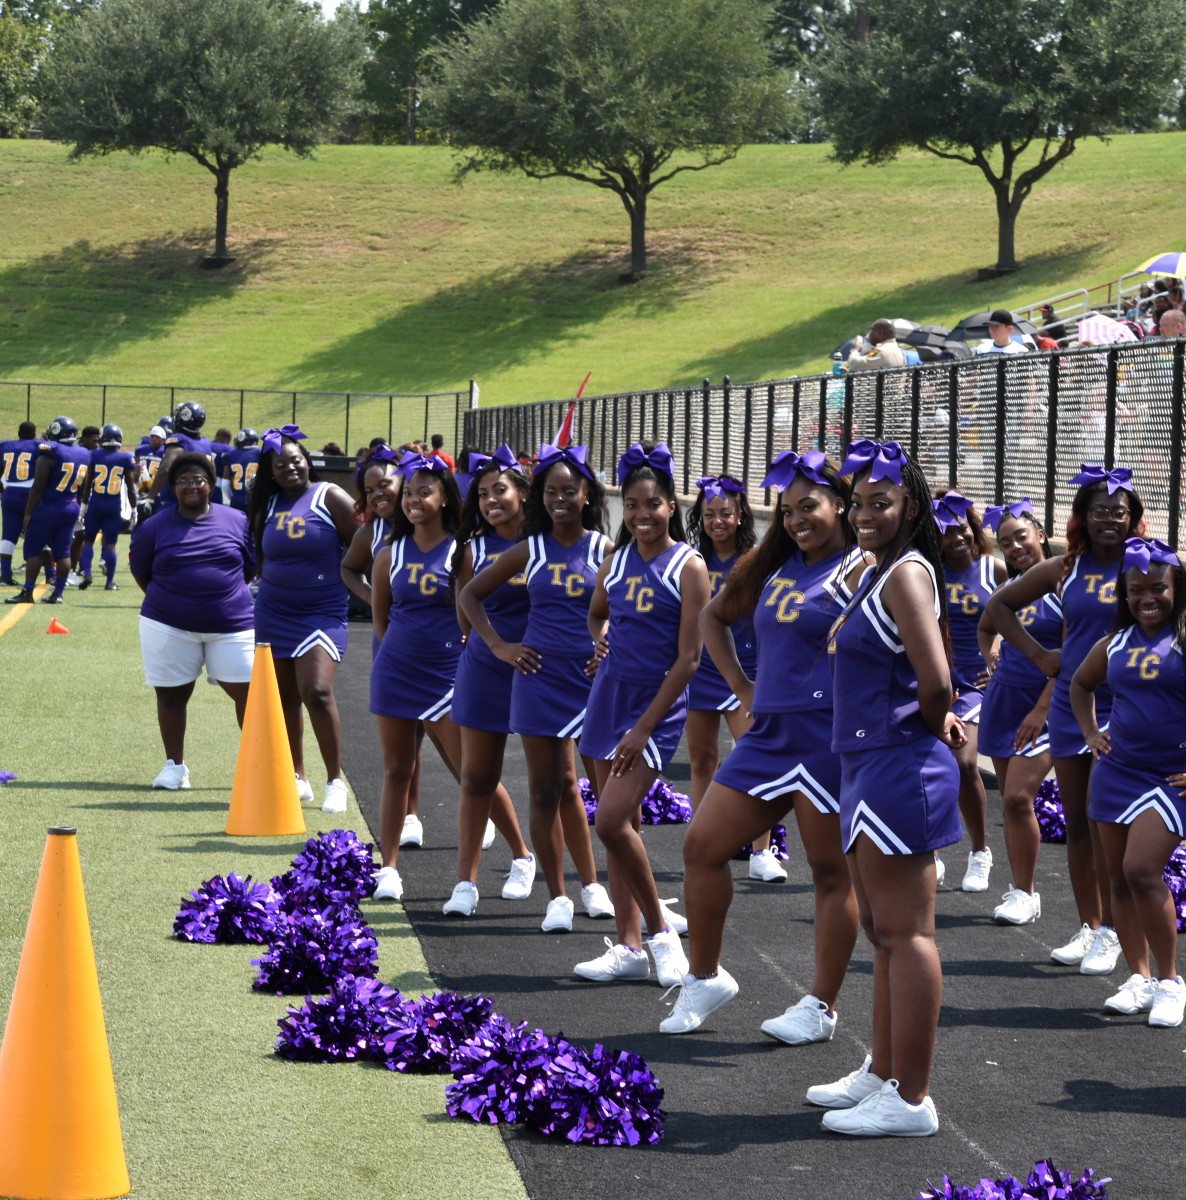 Texas College Cheerleaders in purple uniforms at a football game.